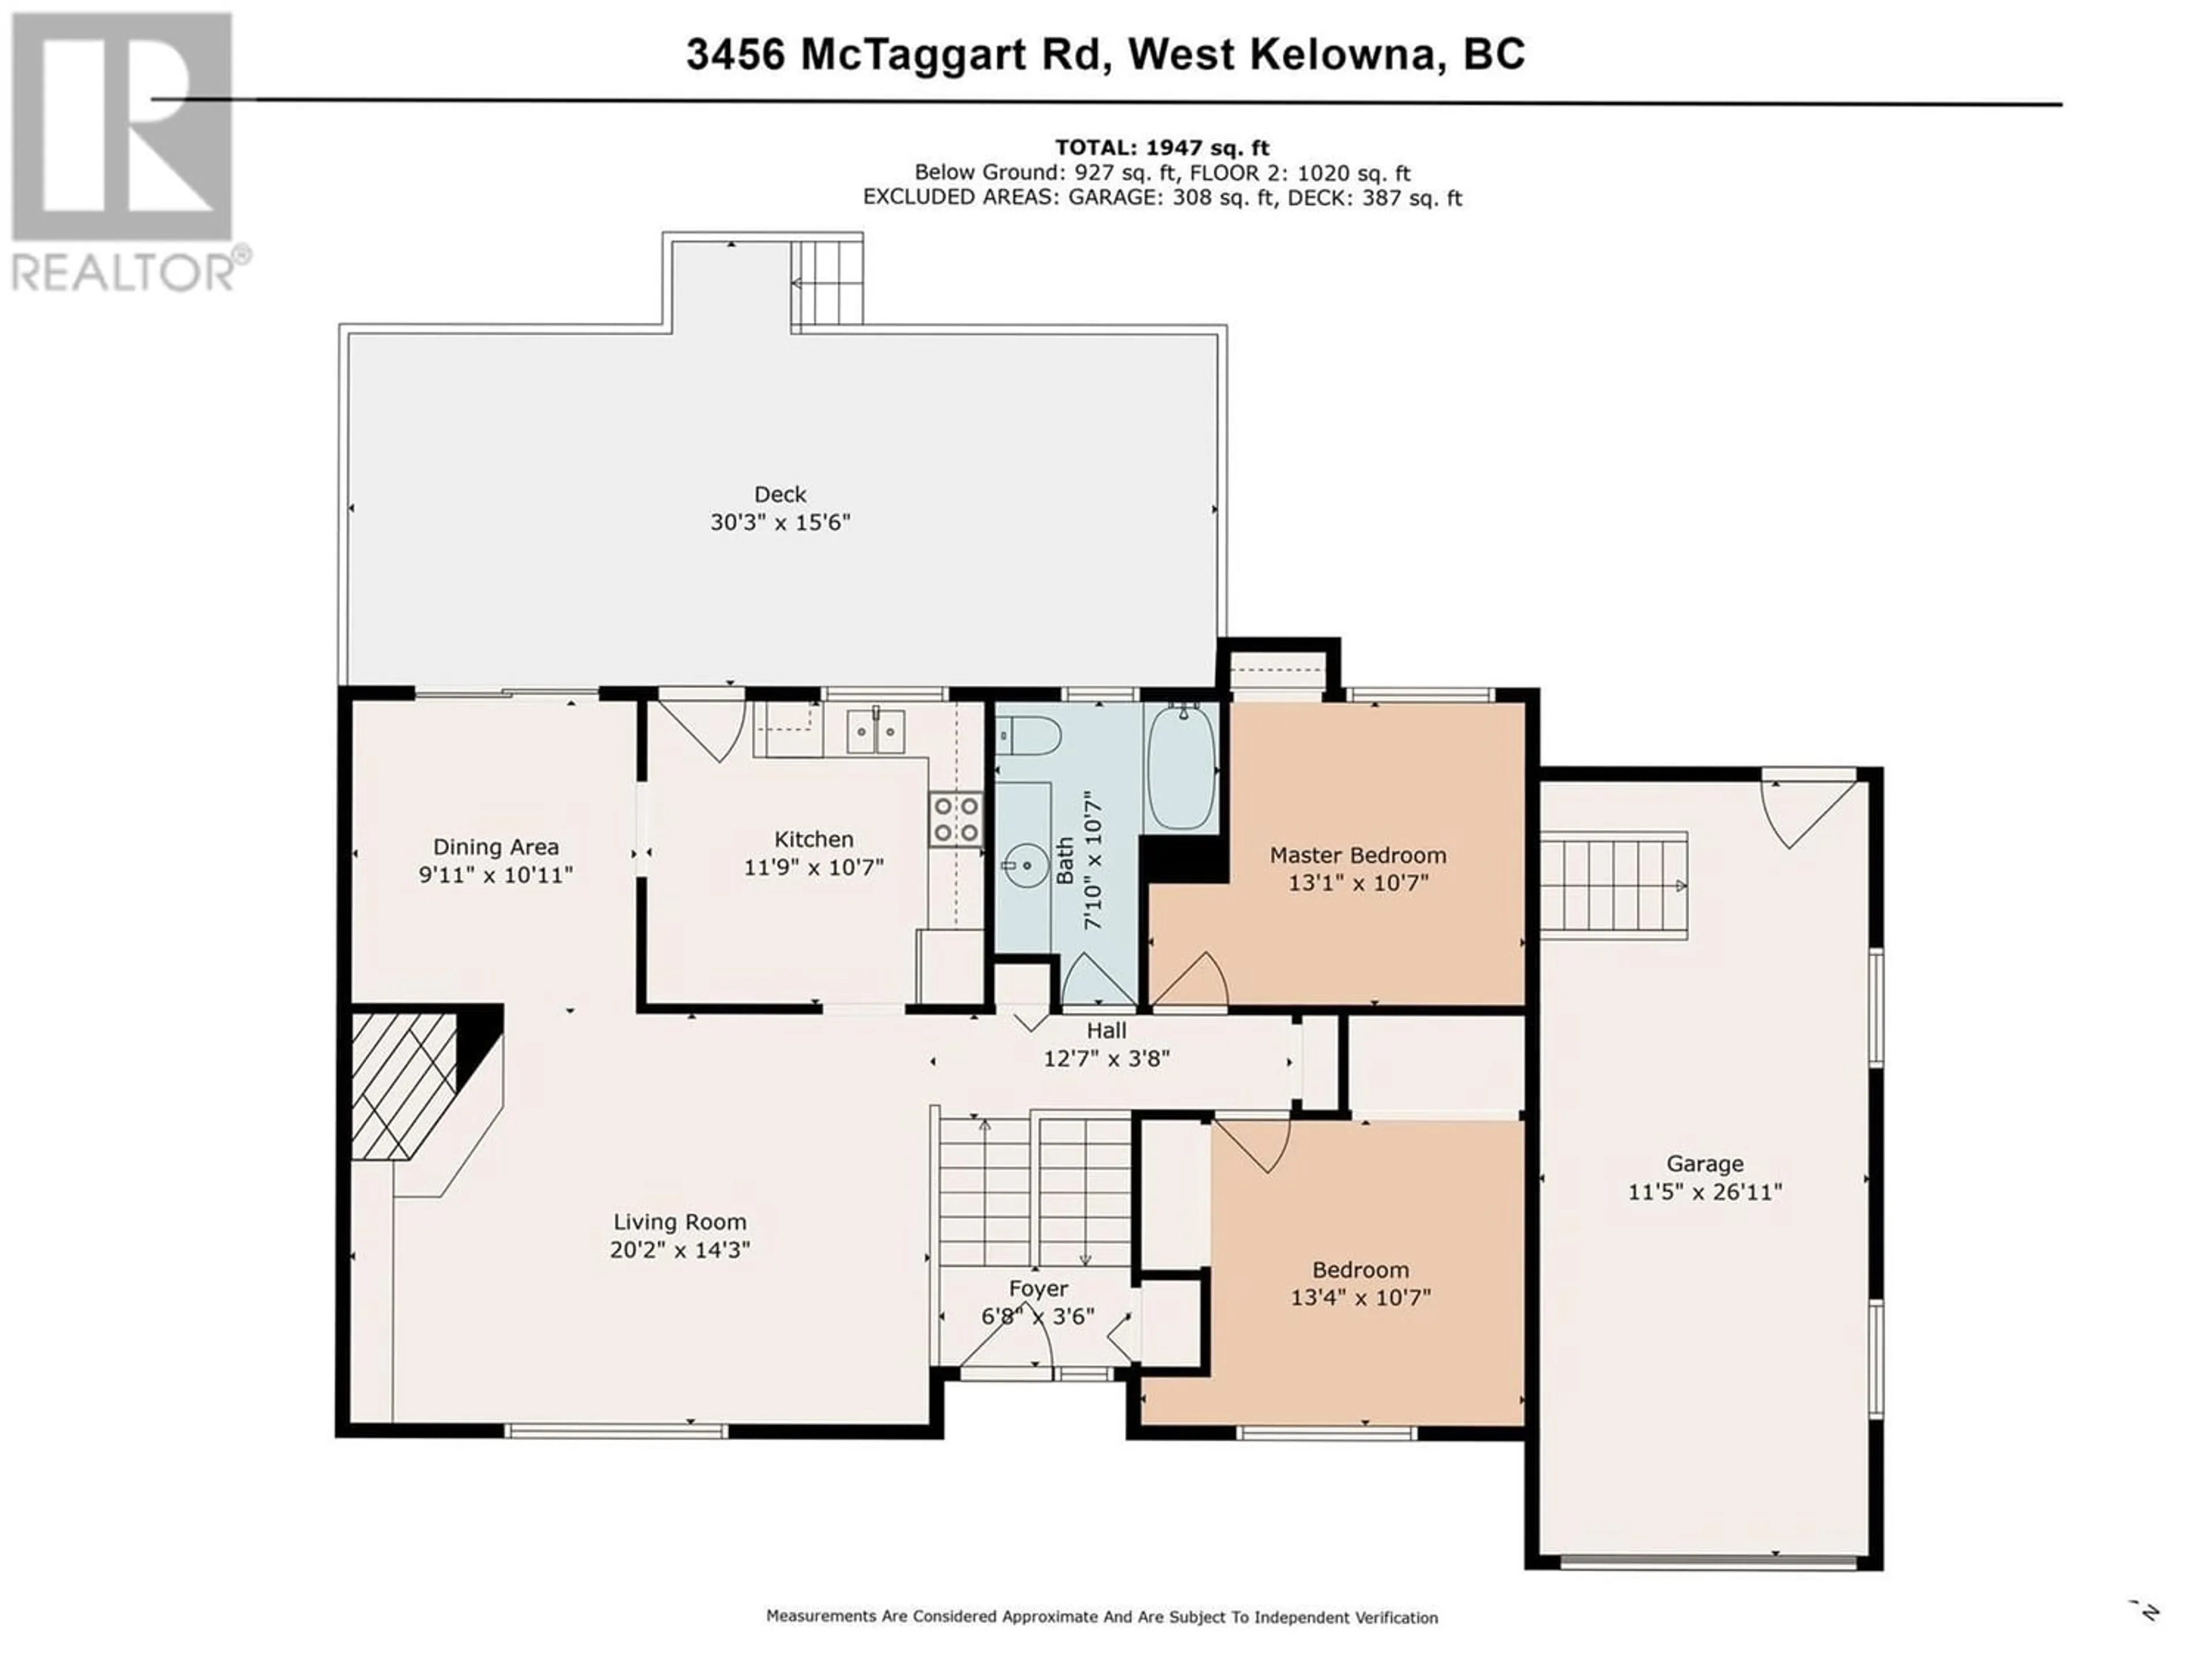 Floor plan for 3456 McTaggart Road, West Kelowna British Columbia V4T1H6